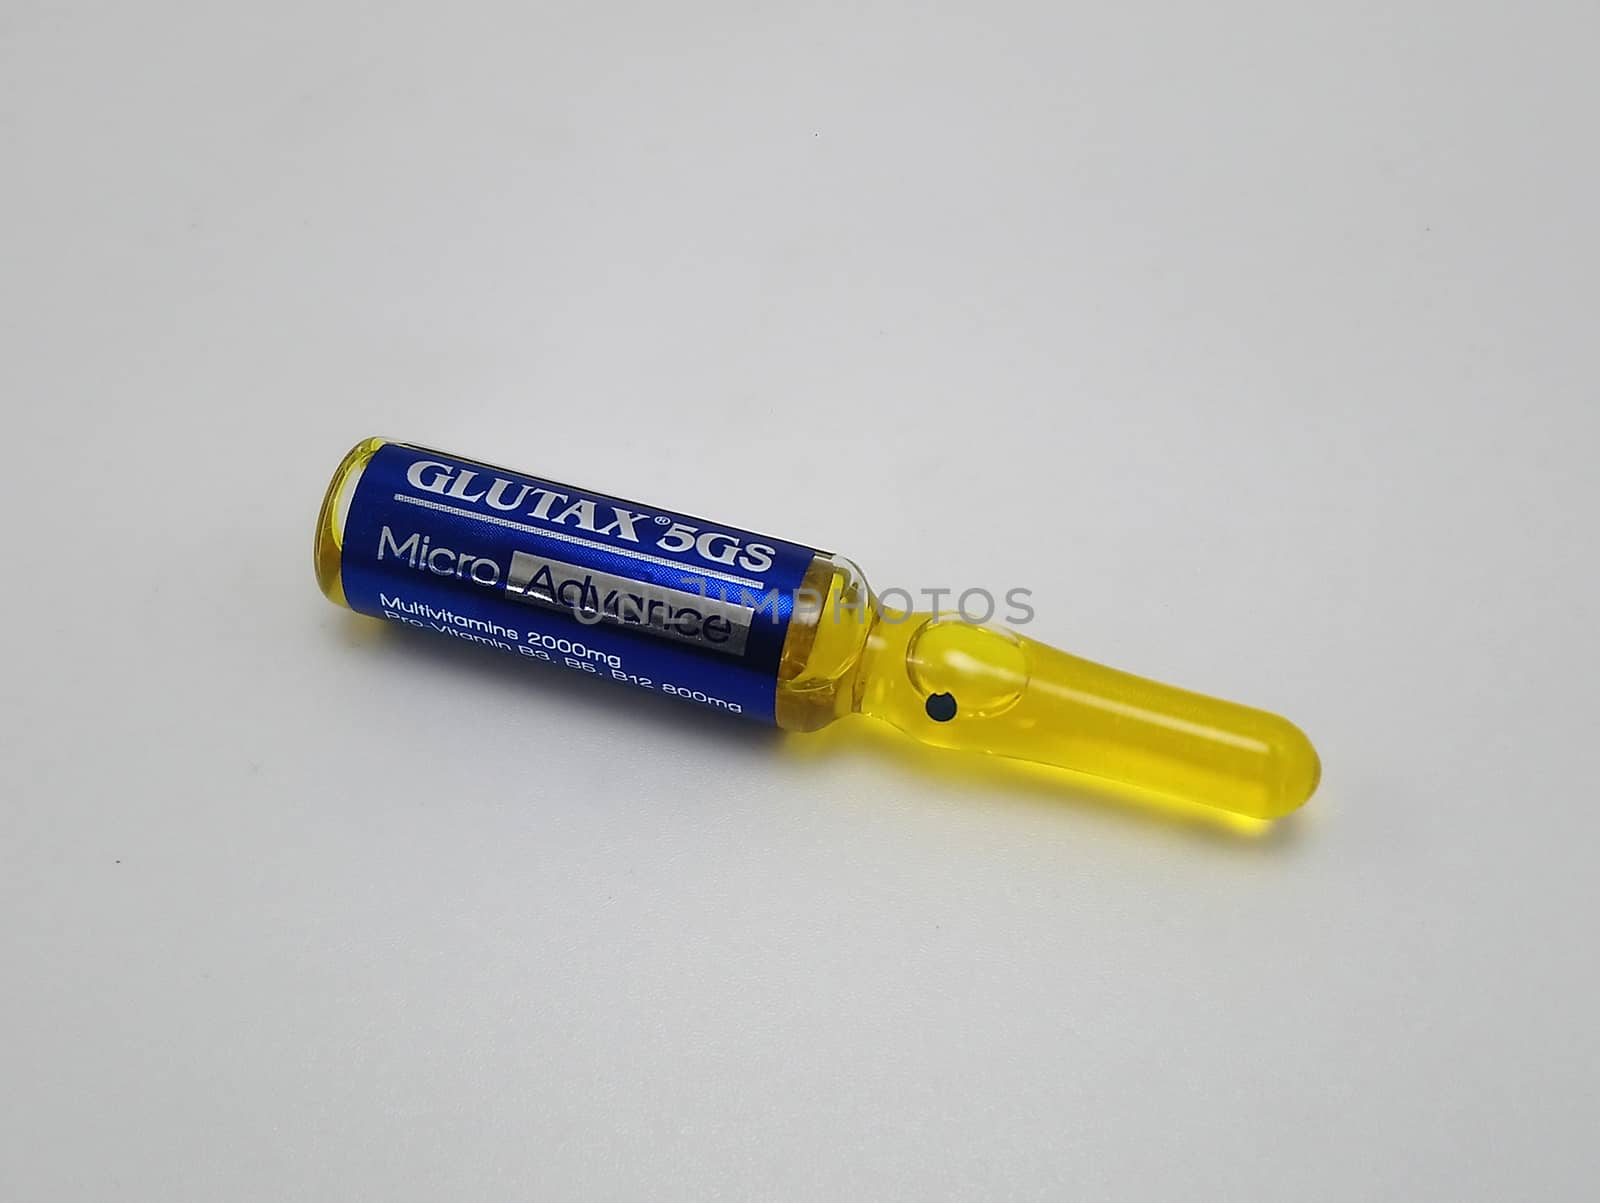 Glutax 5gs micro advance vial in Manila, Philippines by imwaltersy